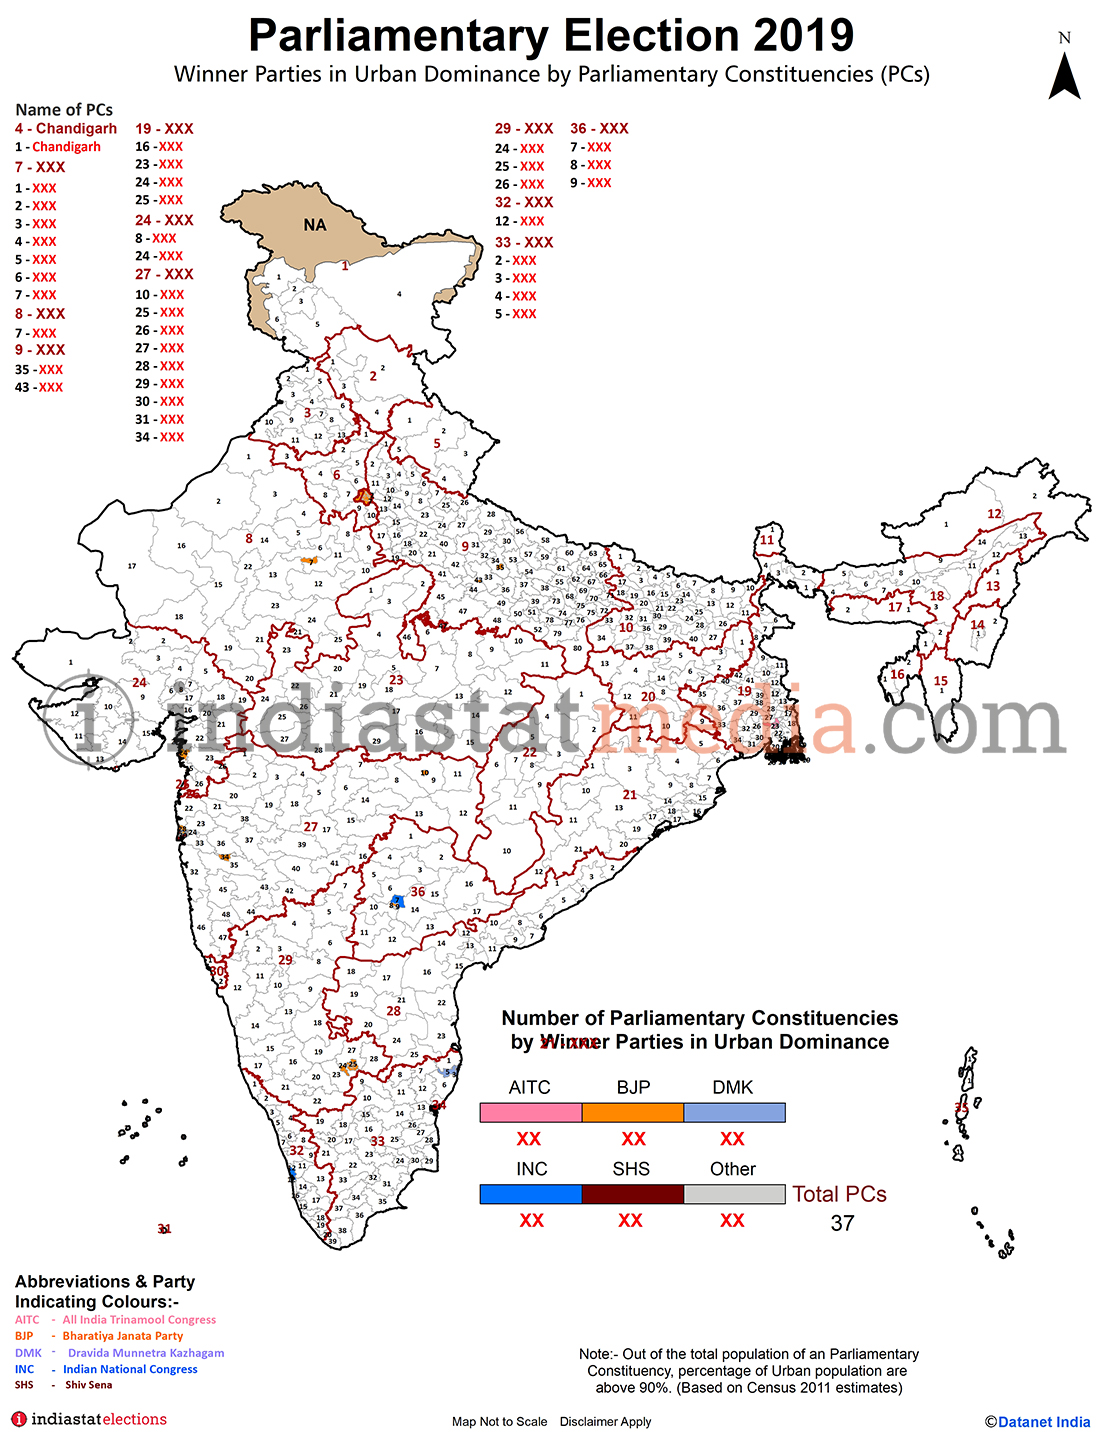 Winner Parties in Urban Dominance Parliamentary Constituencies in India (Parliamentary Election - 2019)